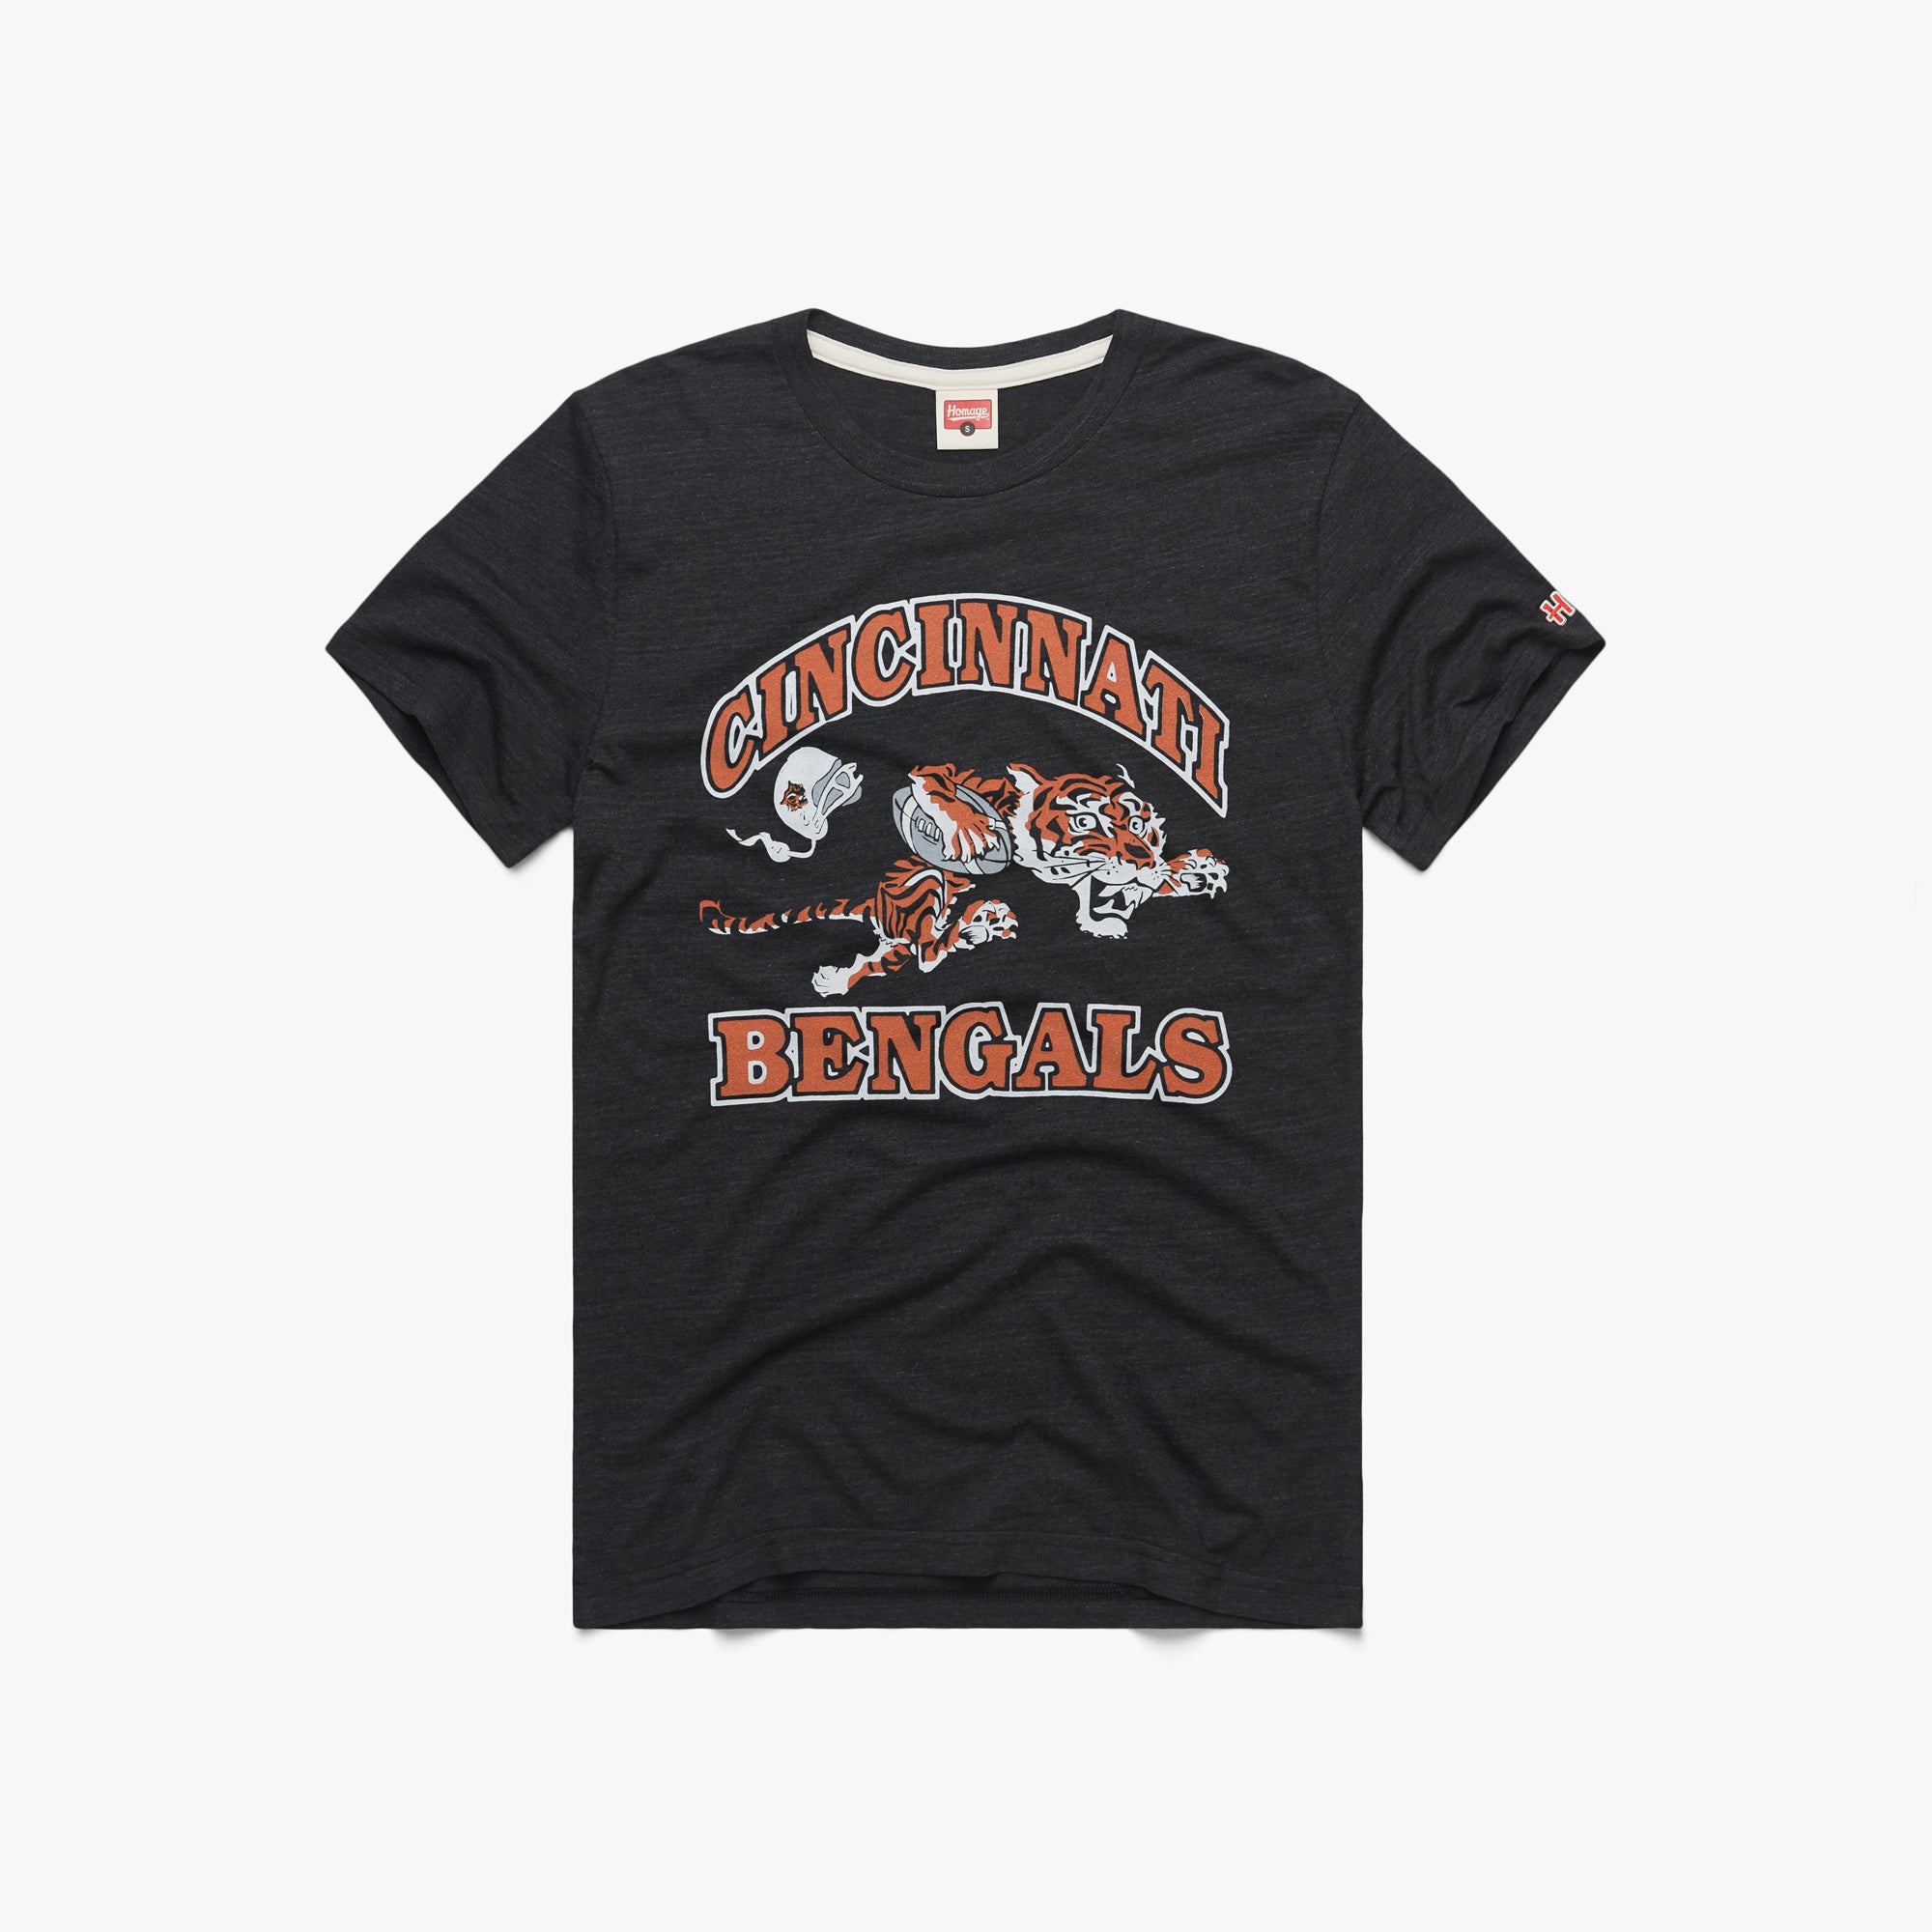 Cincinnati Bengals '68 T-Shirt from Homage. | Officially Licensed Vintage NFL Apparel from Homage Pro Shop.